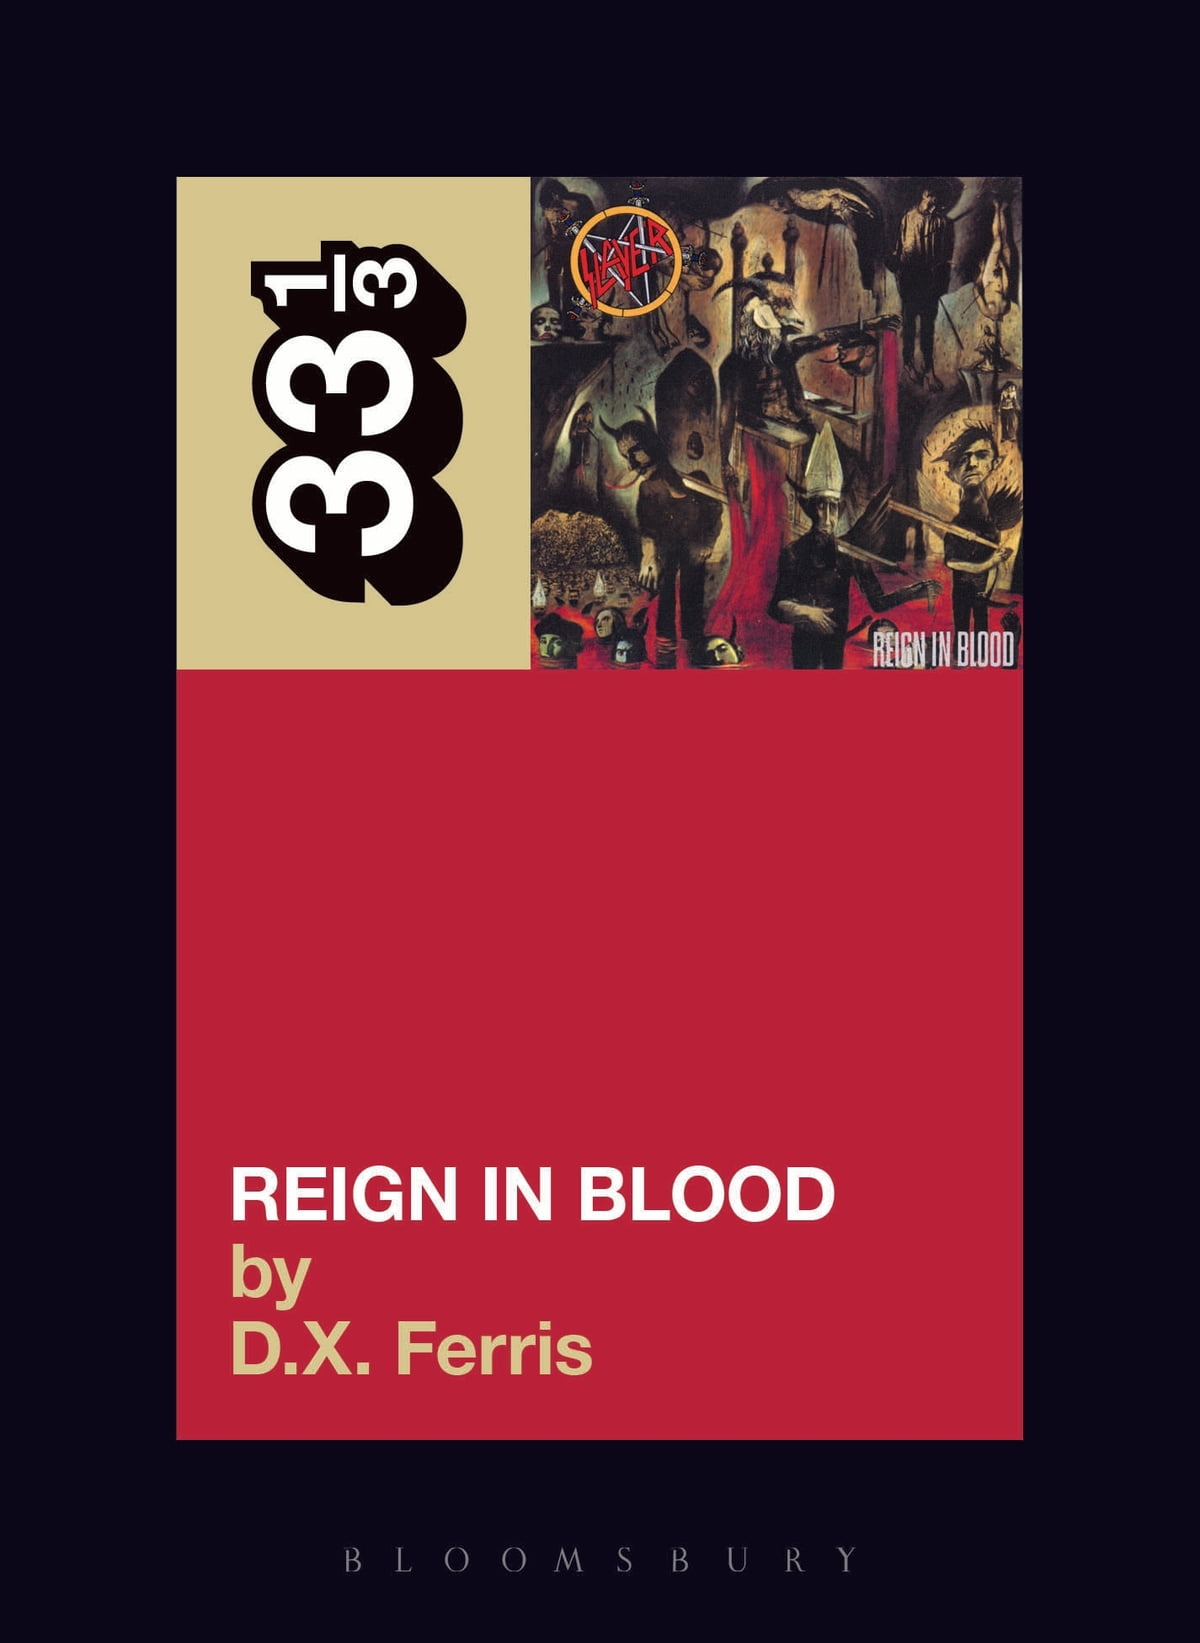 The cover for 'Reign in Blood'.